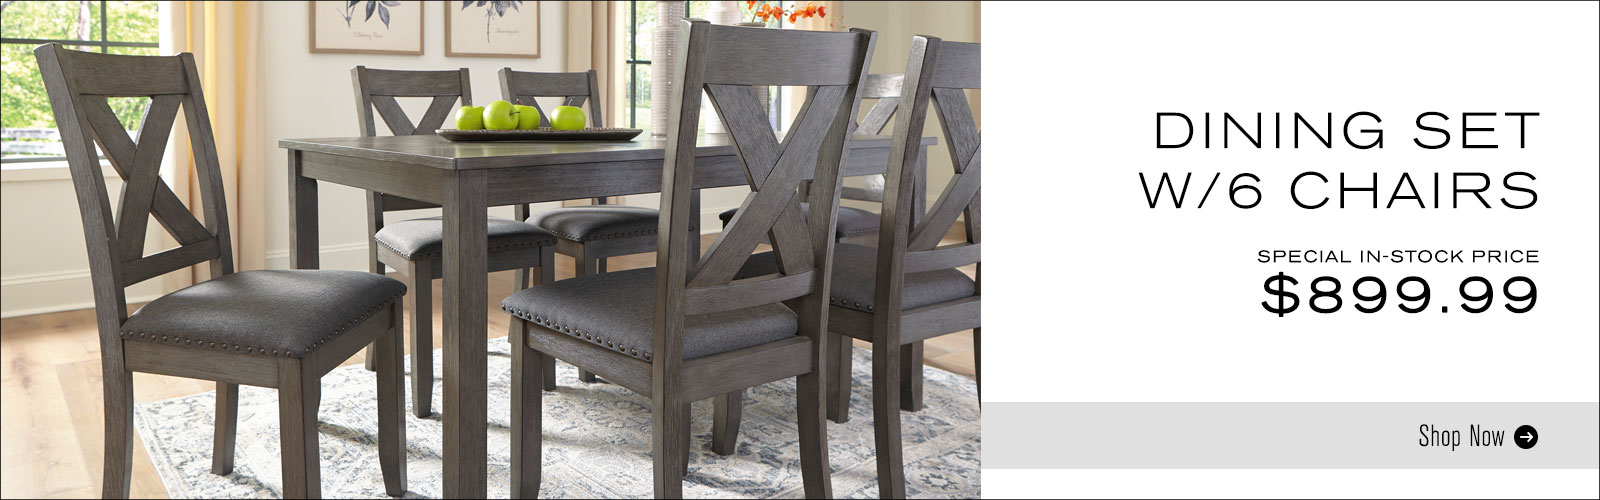 Dining Set w/6 Chairs $899.99